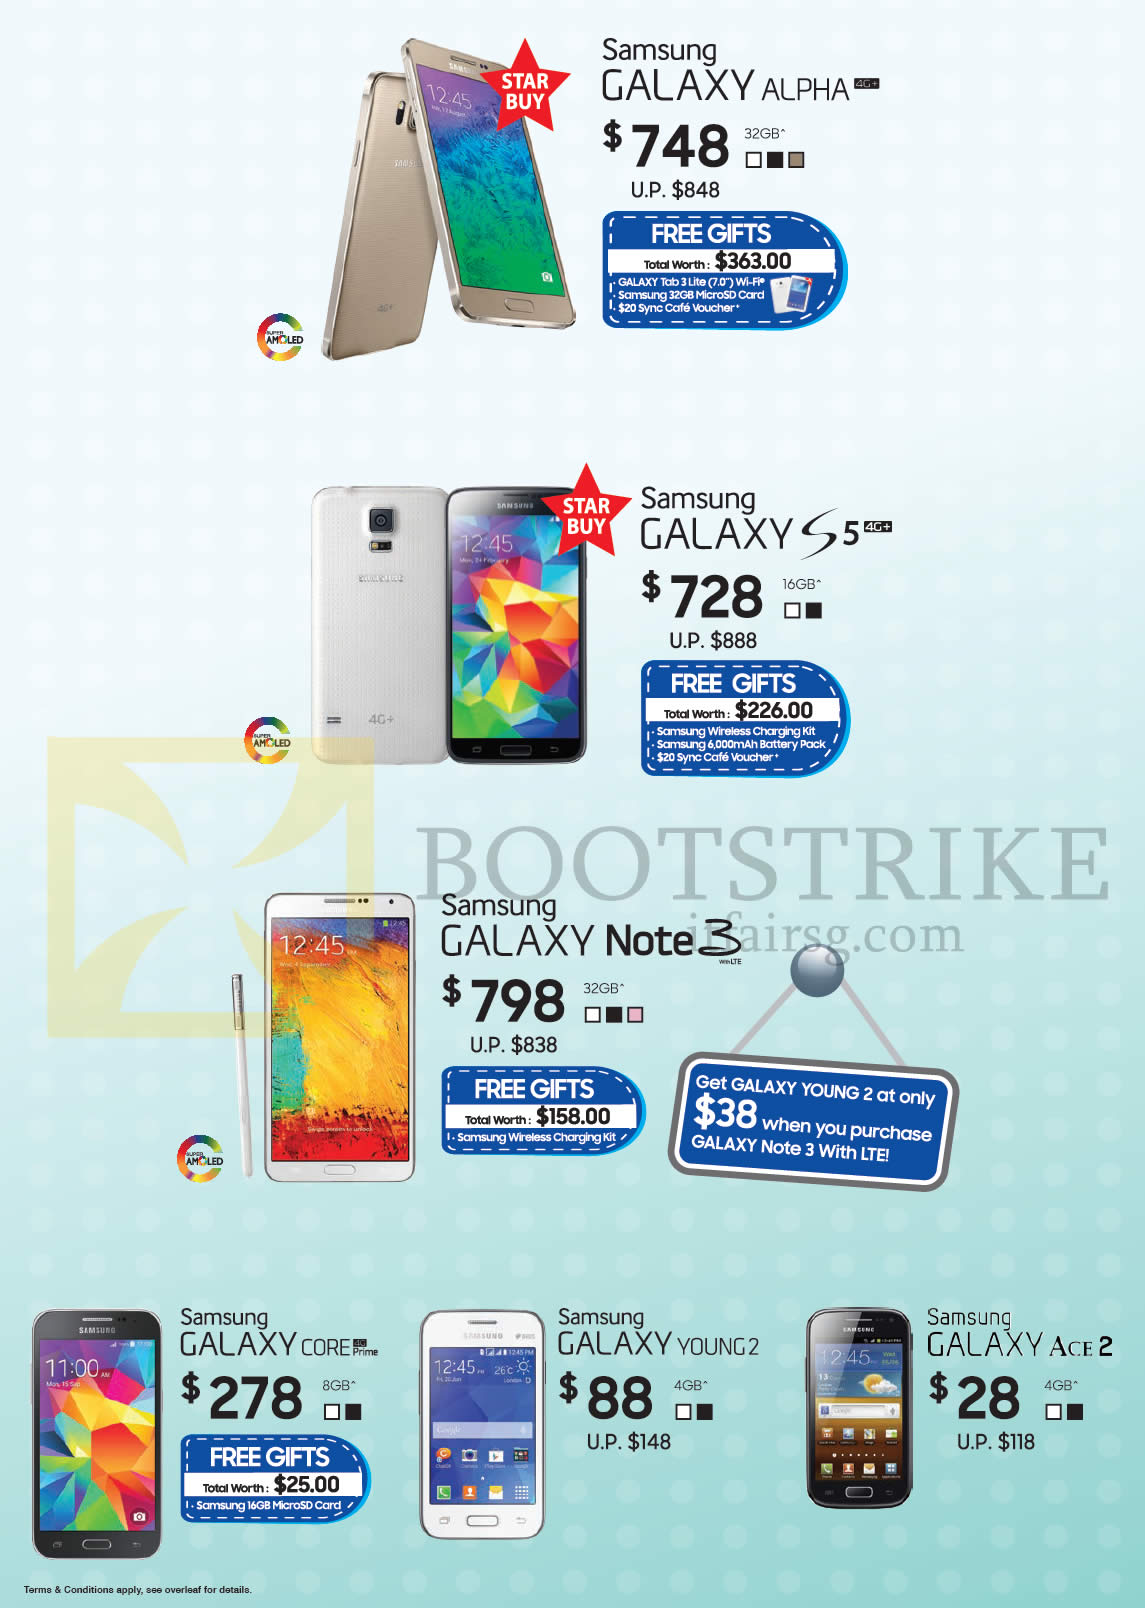 IT SHOW 2015 price list image brochure of Samsung Mobile Phones Galaxy Alpha, S5, Note 3, Core Prime, Young 2, Ace 2